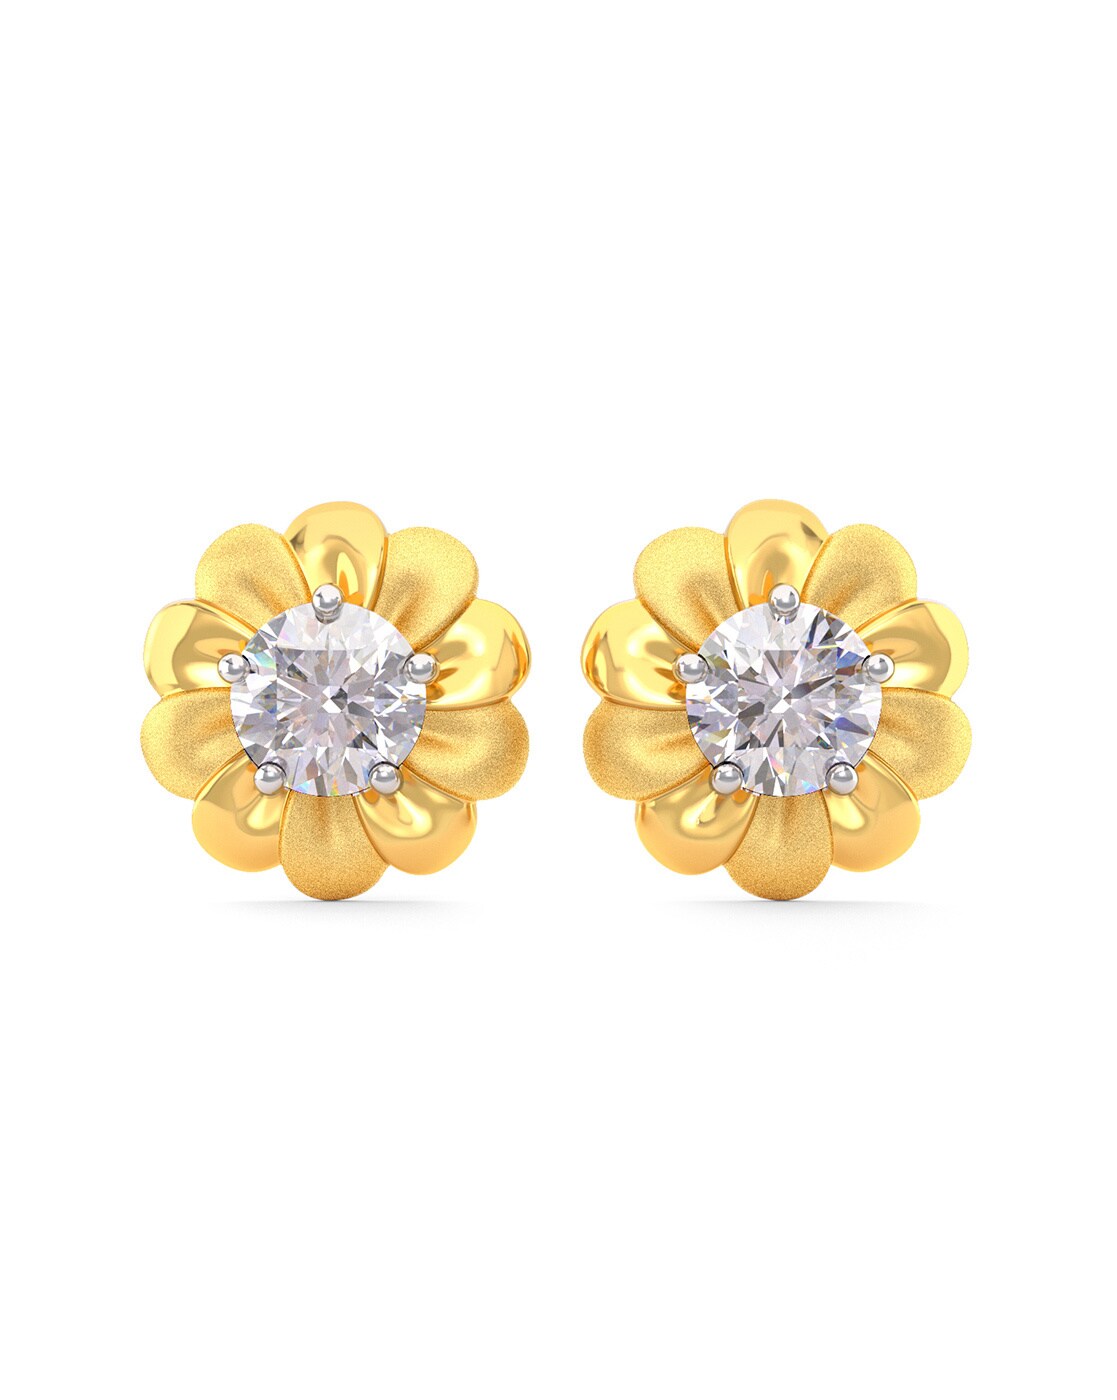 24K Pure Gold Stud Earrings: Tiny flower design 2 – Prima Gold Official